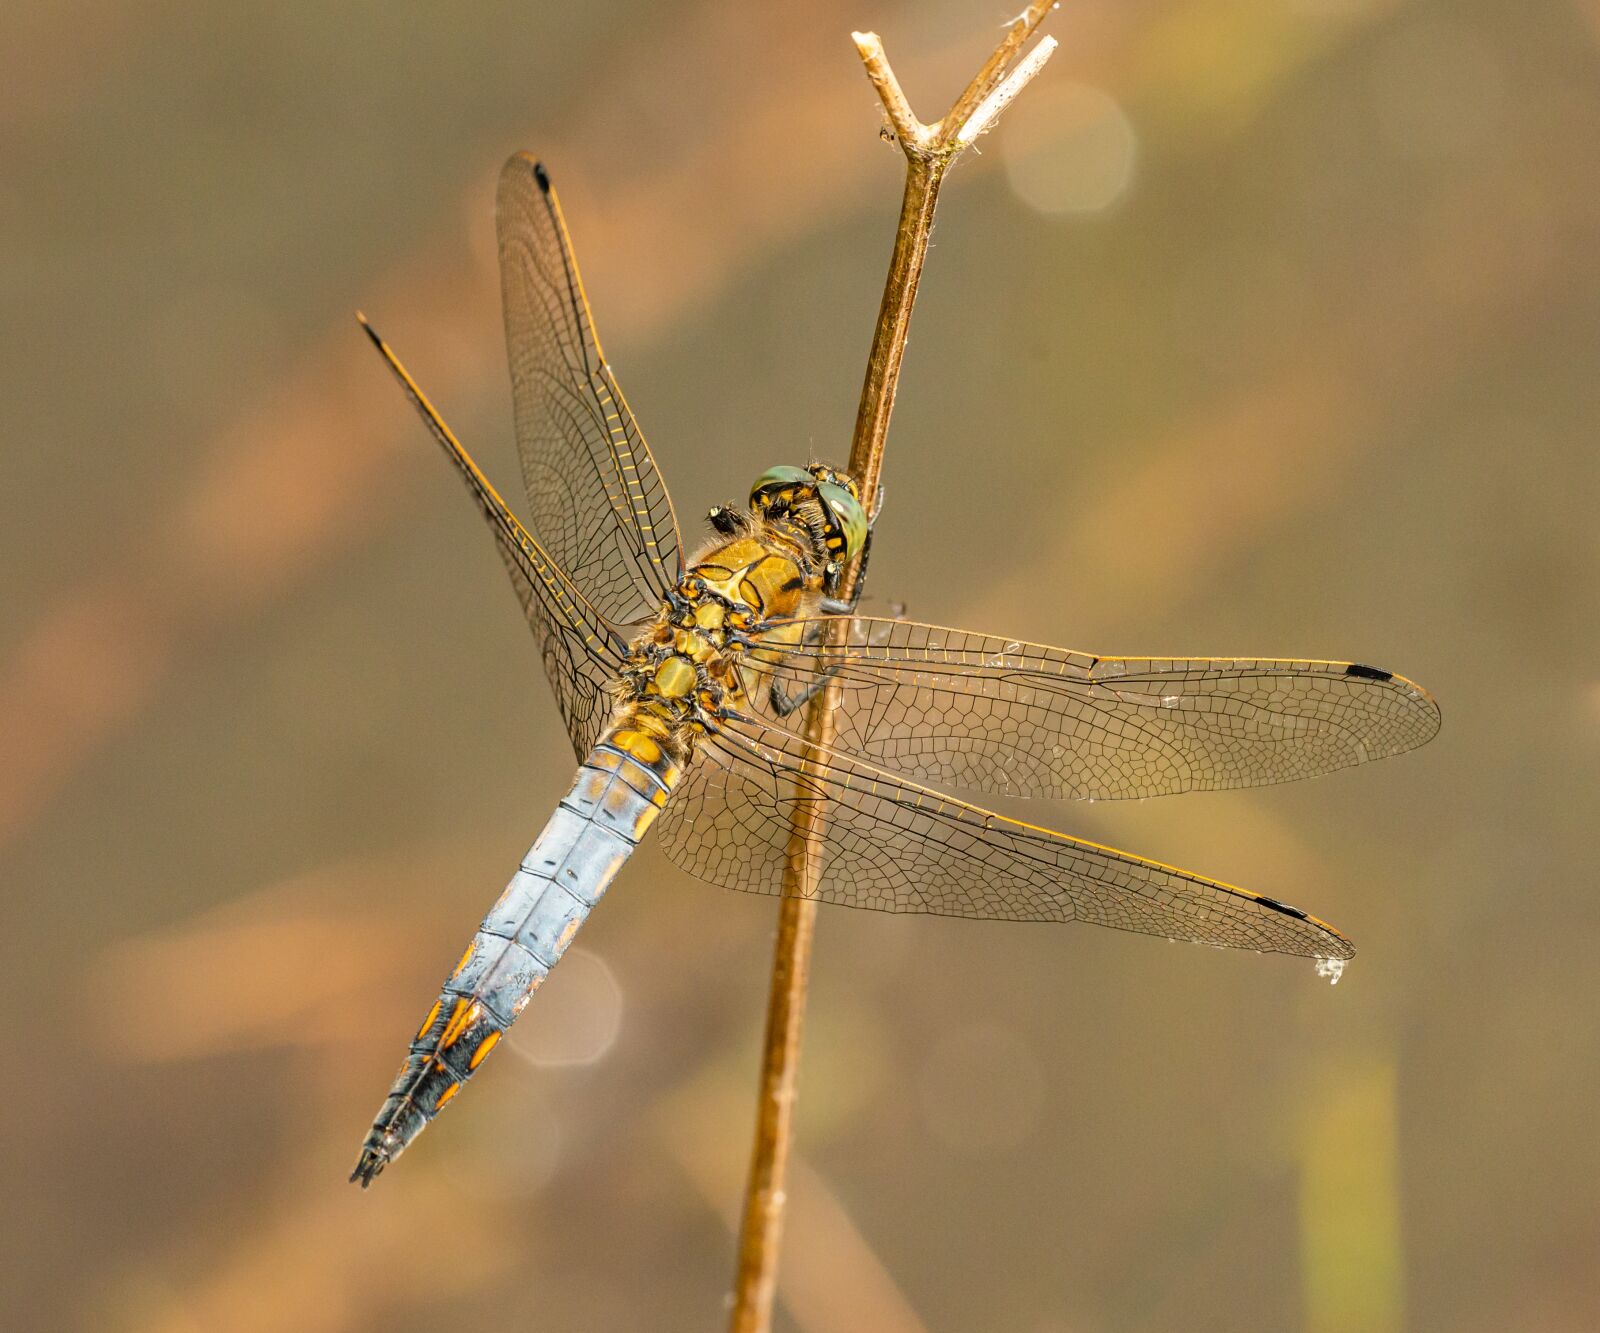 Nikon D800E sample photo. Dragonfly, insect, nature photography